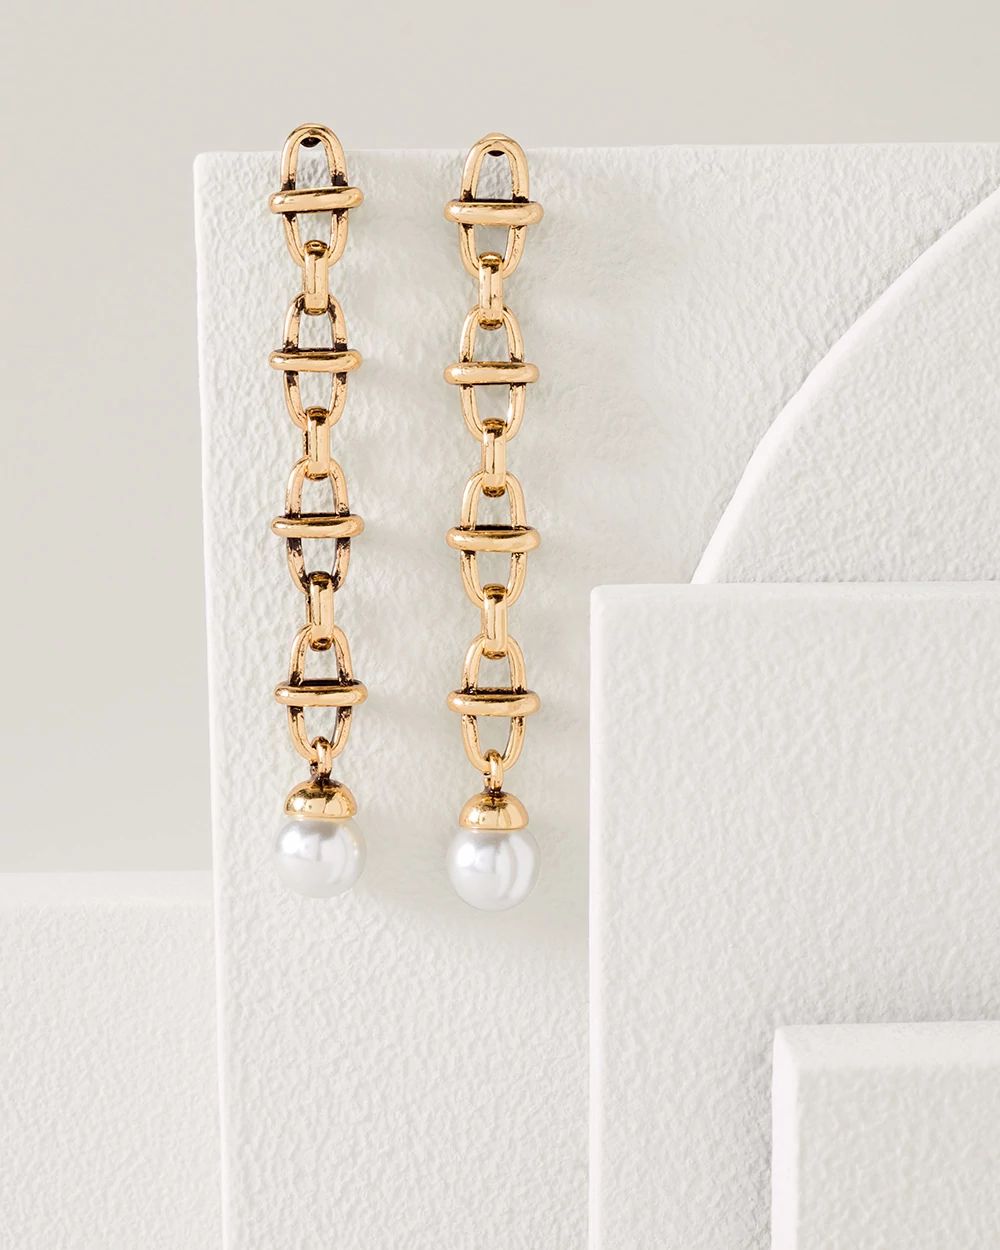 Goldtone & Faux Pearl Earrings click to view larger image.